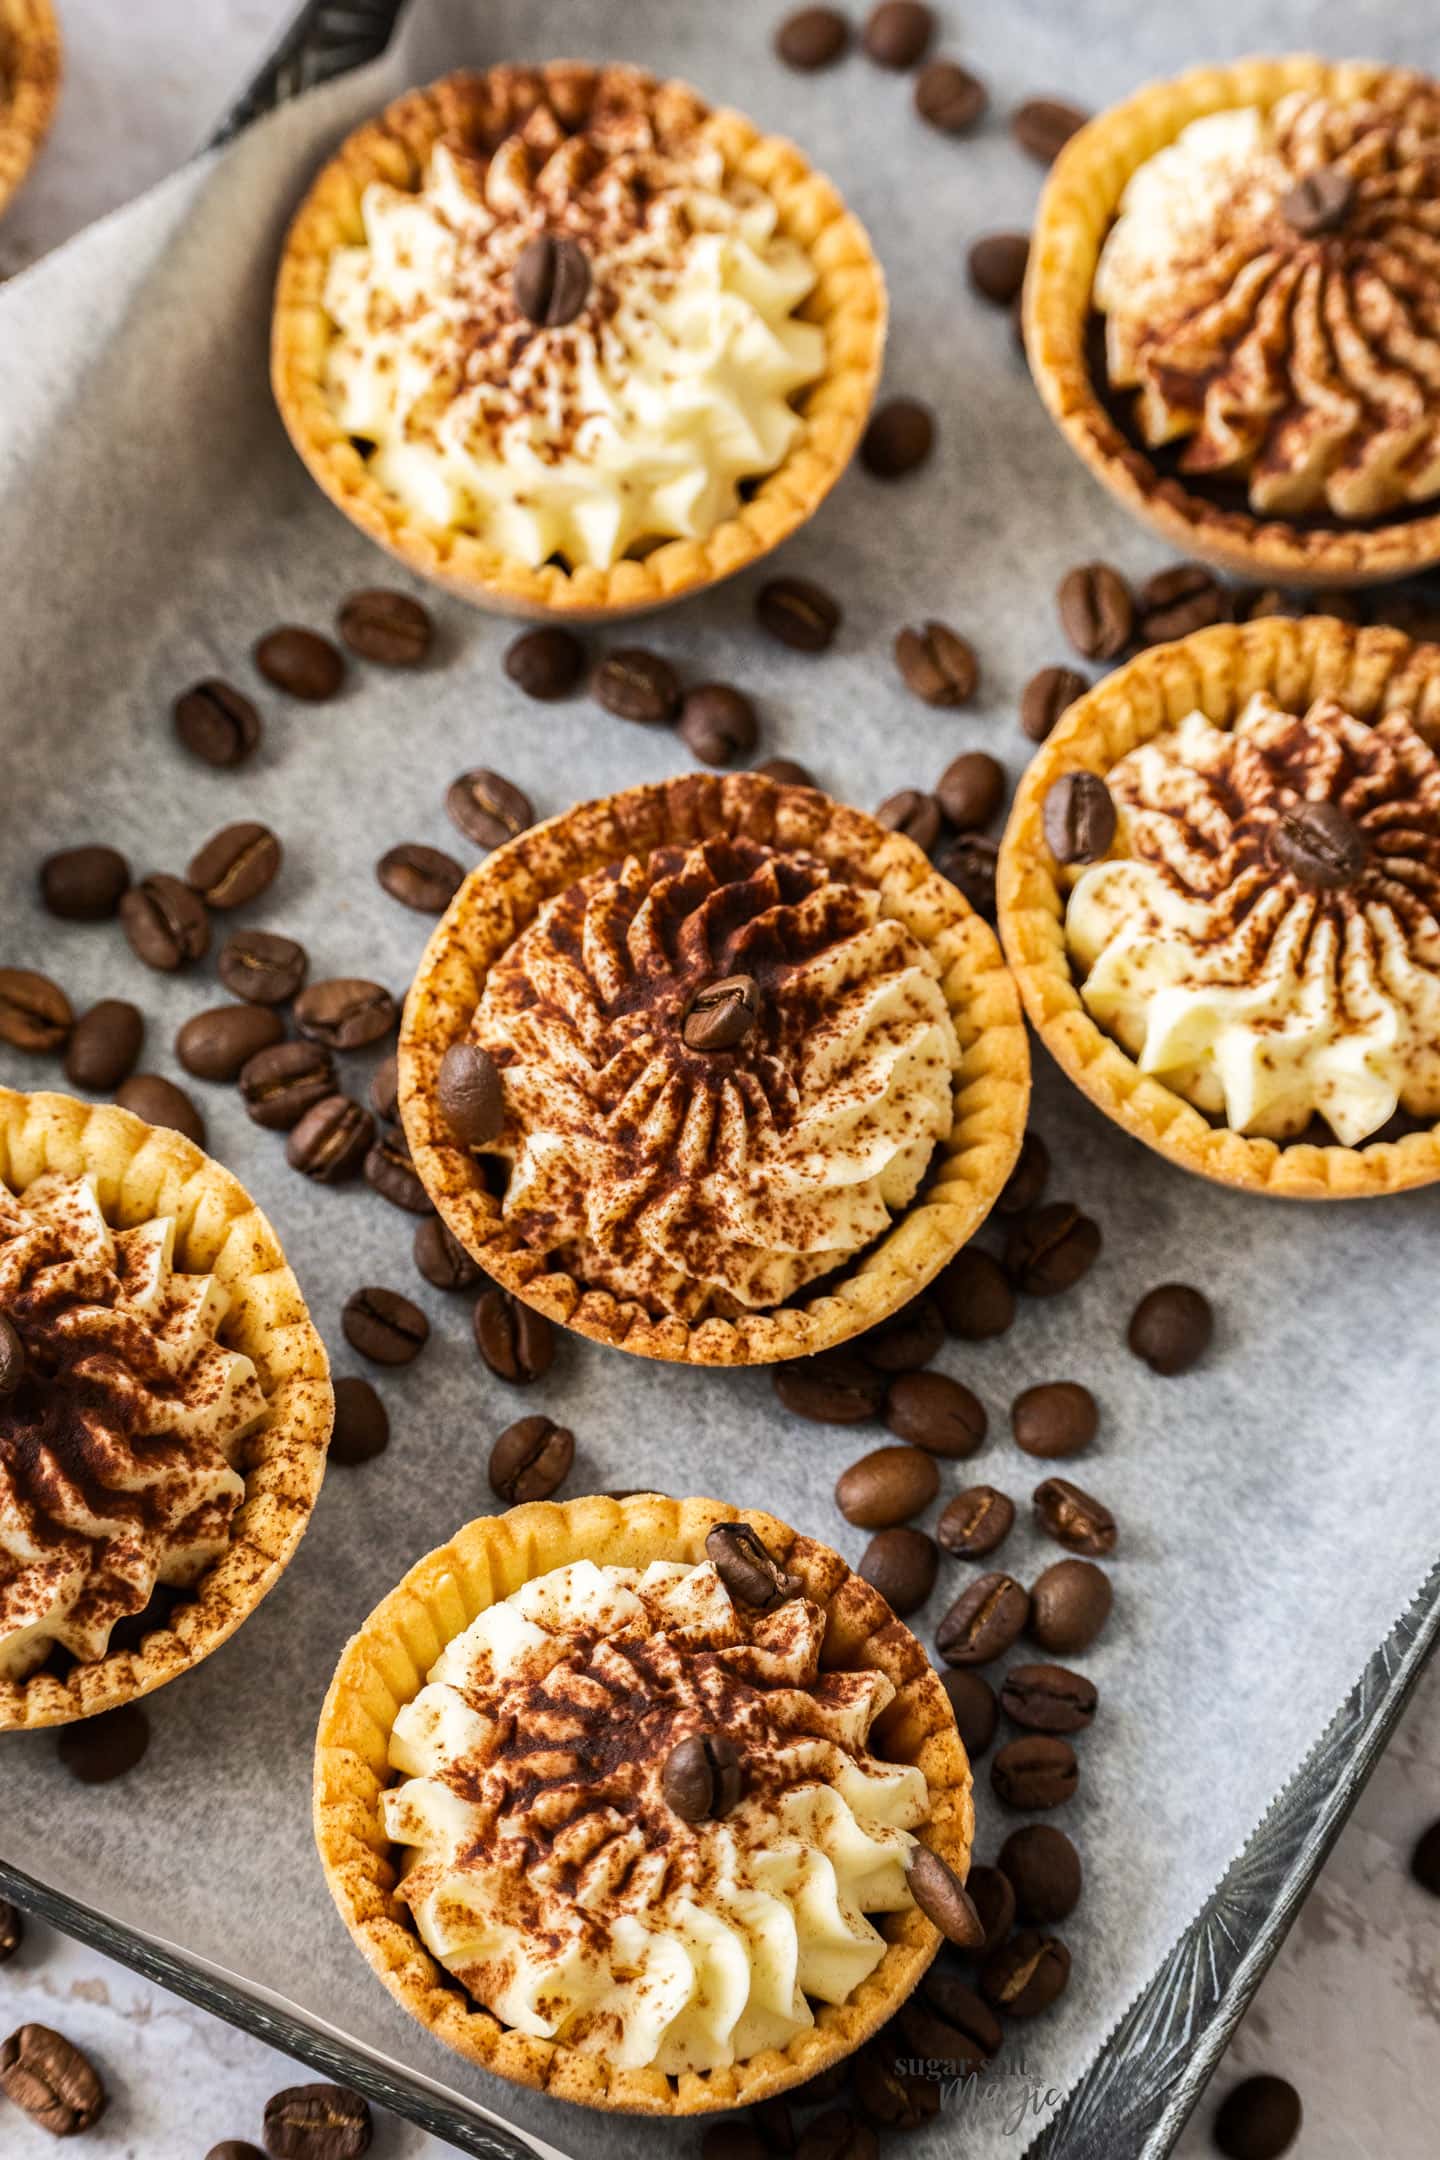 6 cream filled tartlets on a metal tray surrounded by coffee beans.